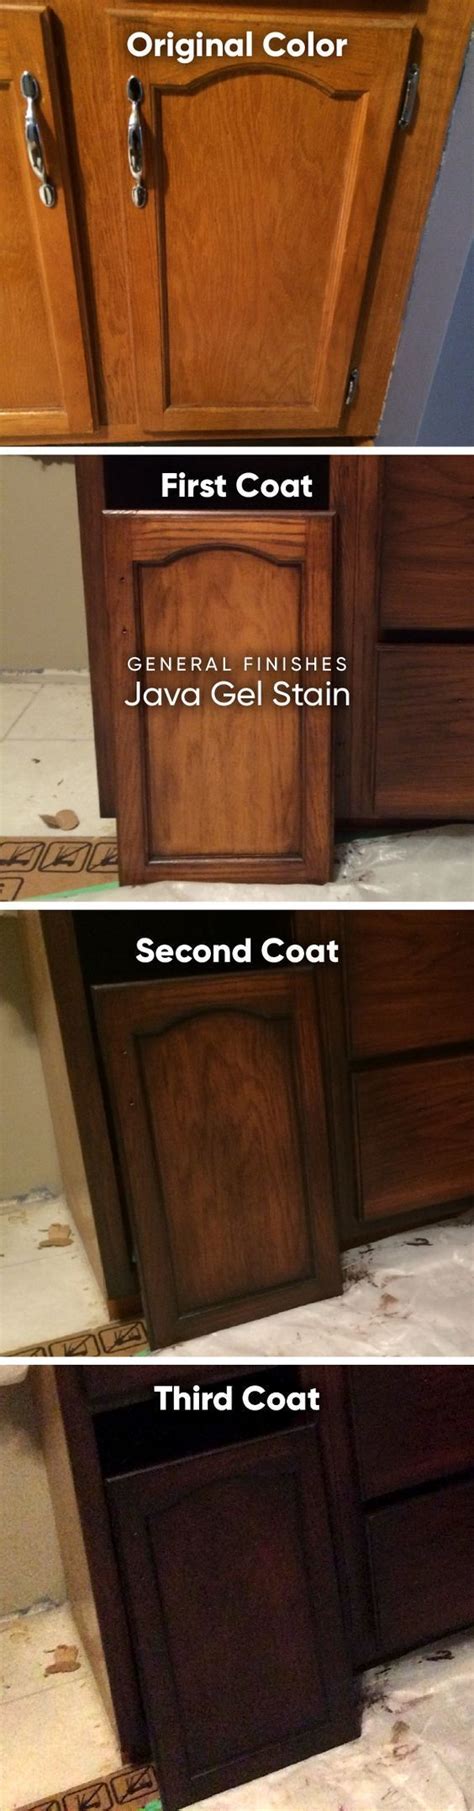 General Finishes Gel Stain Java Staining Cabinets Honey Oak